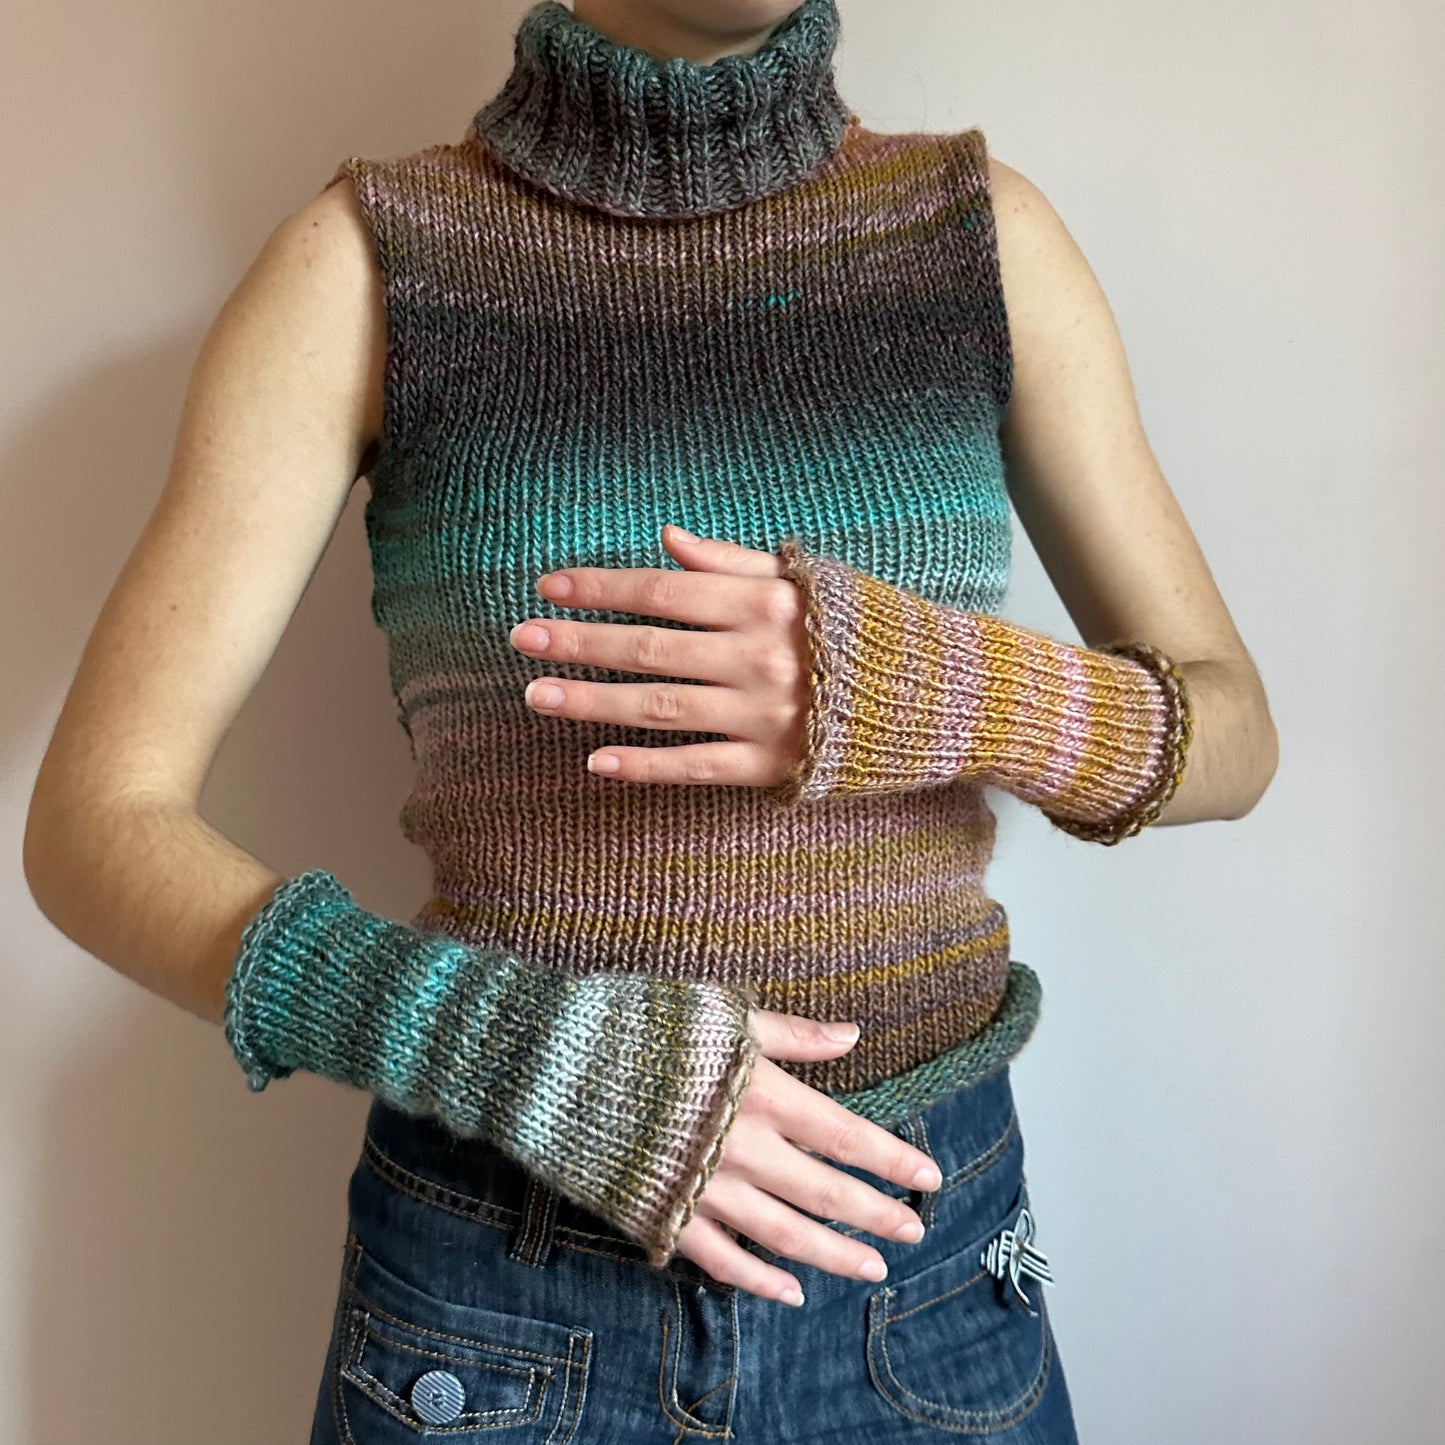 Handmade knitted ombré hand warmers in Alba colourway